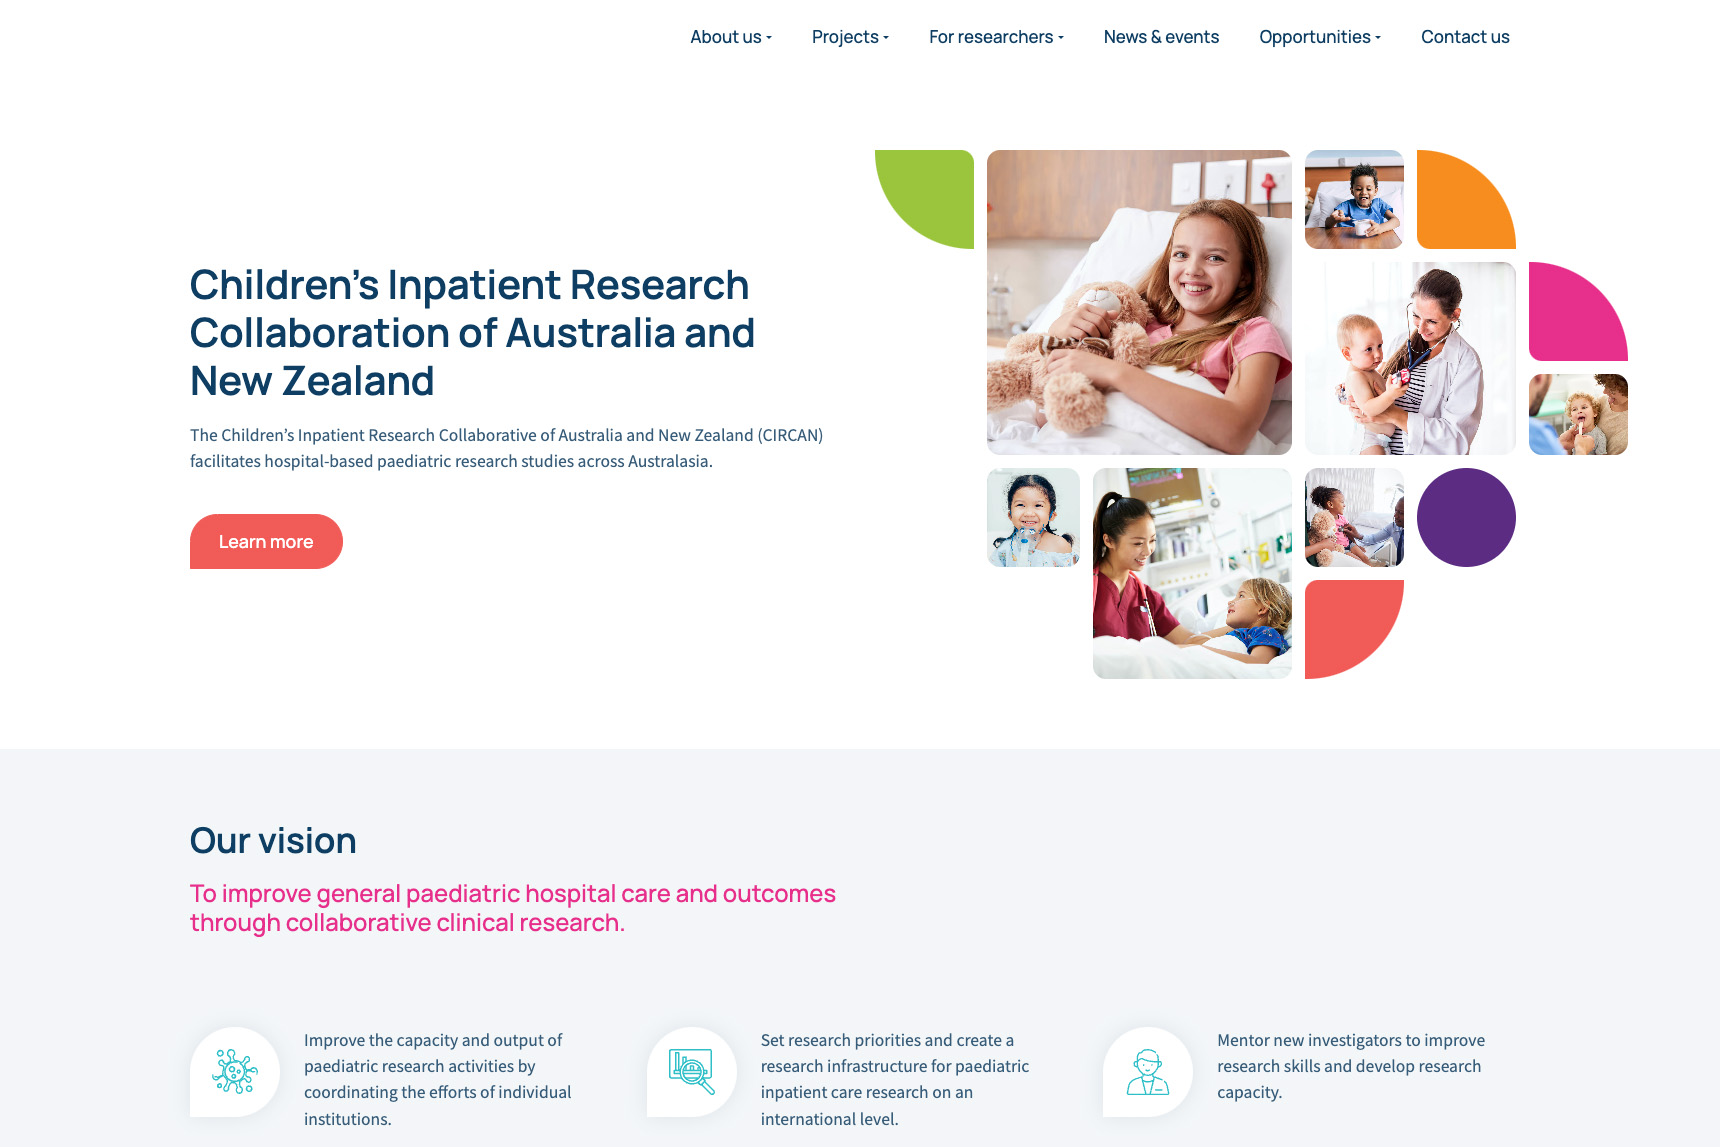 Screengrab of the Children’s Inpatient Research Collaboration of Australia and New Zealand website homepage